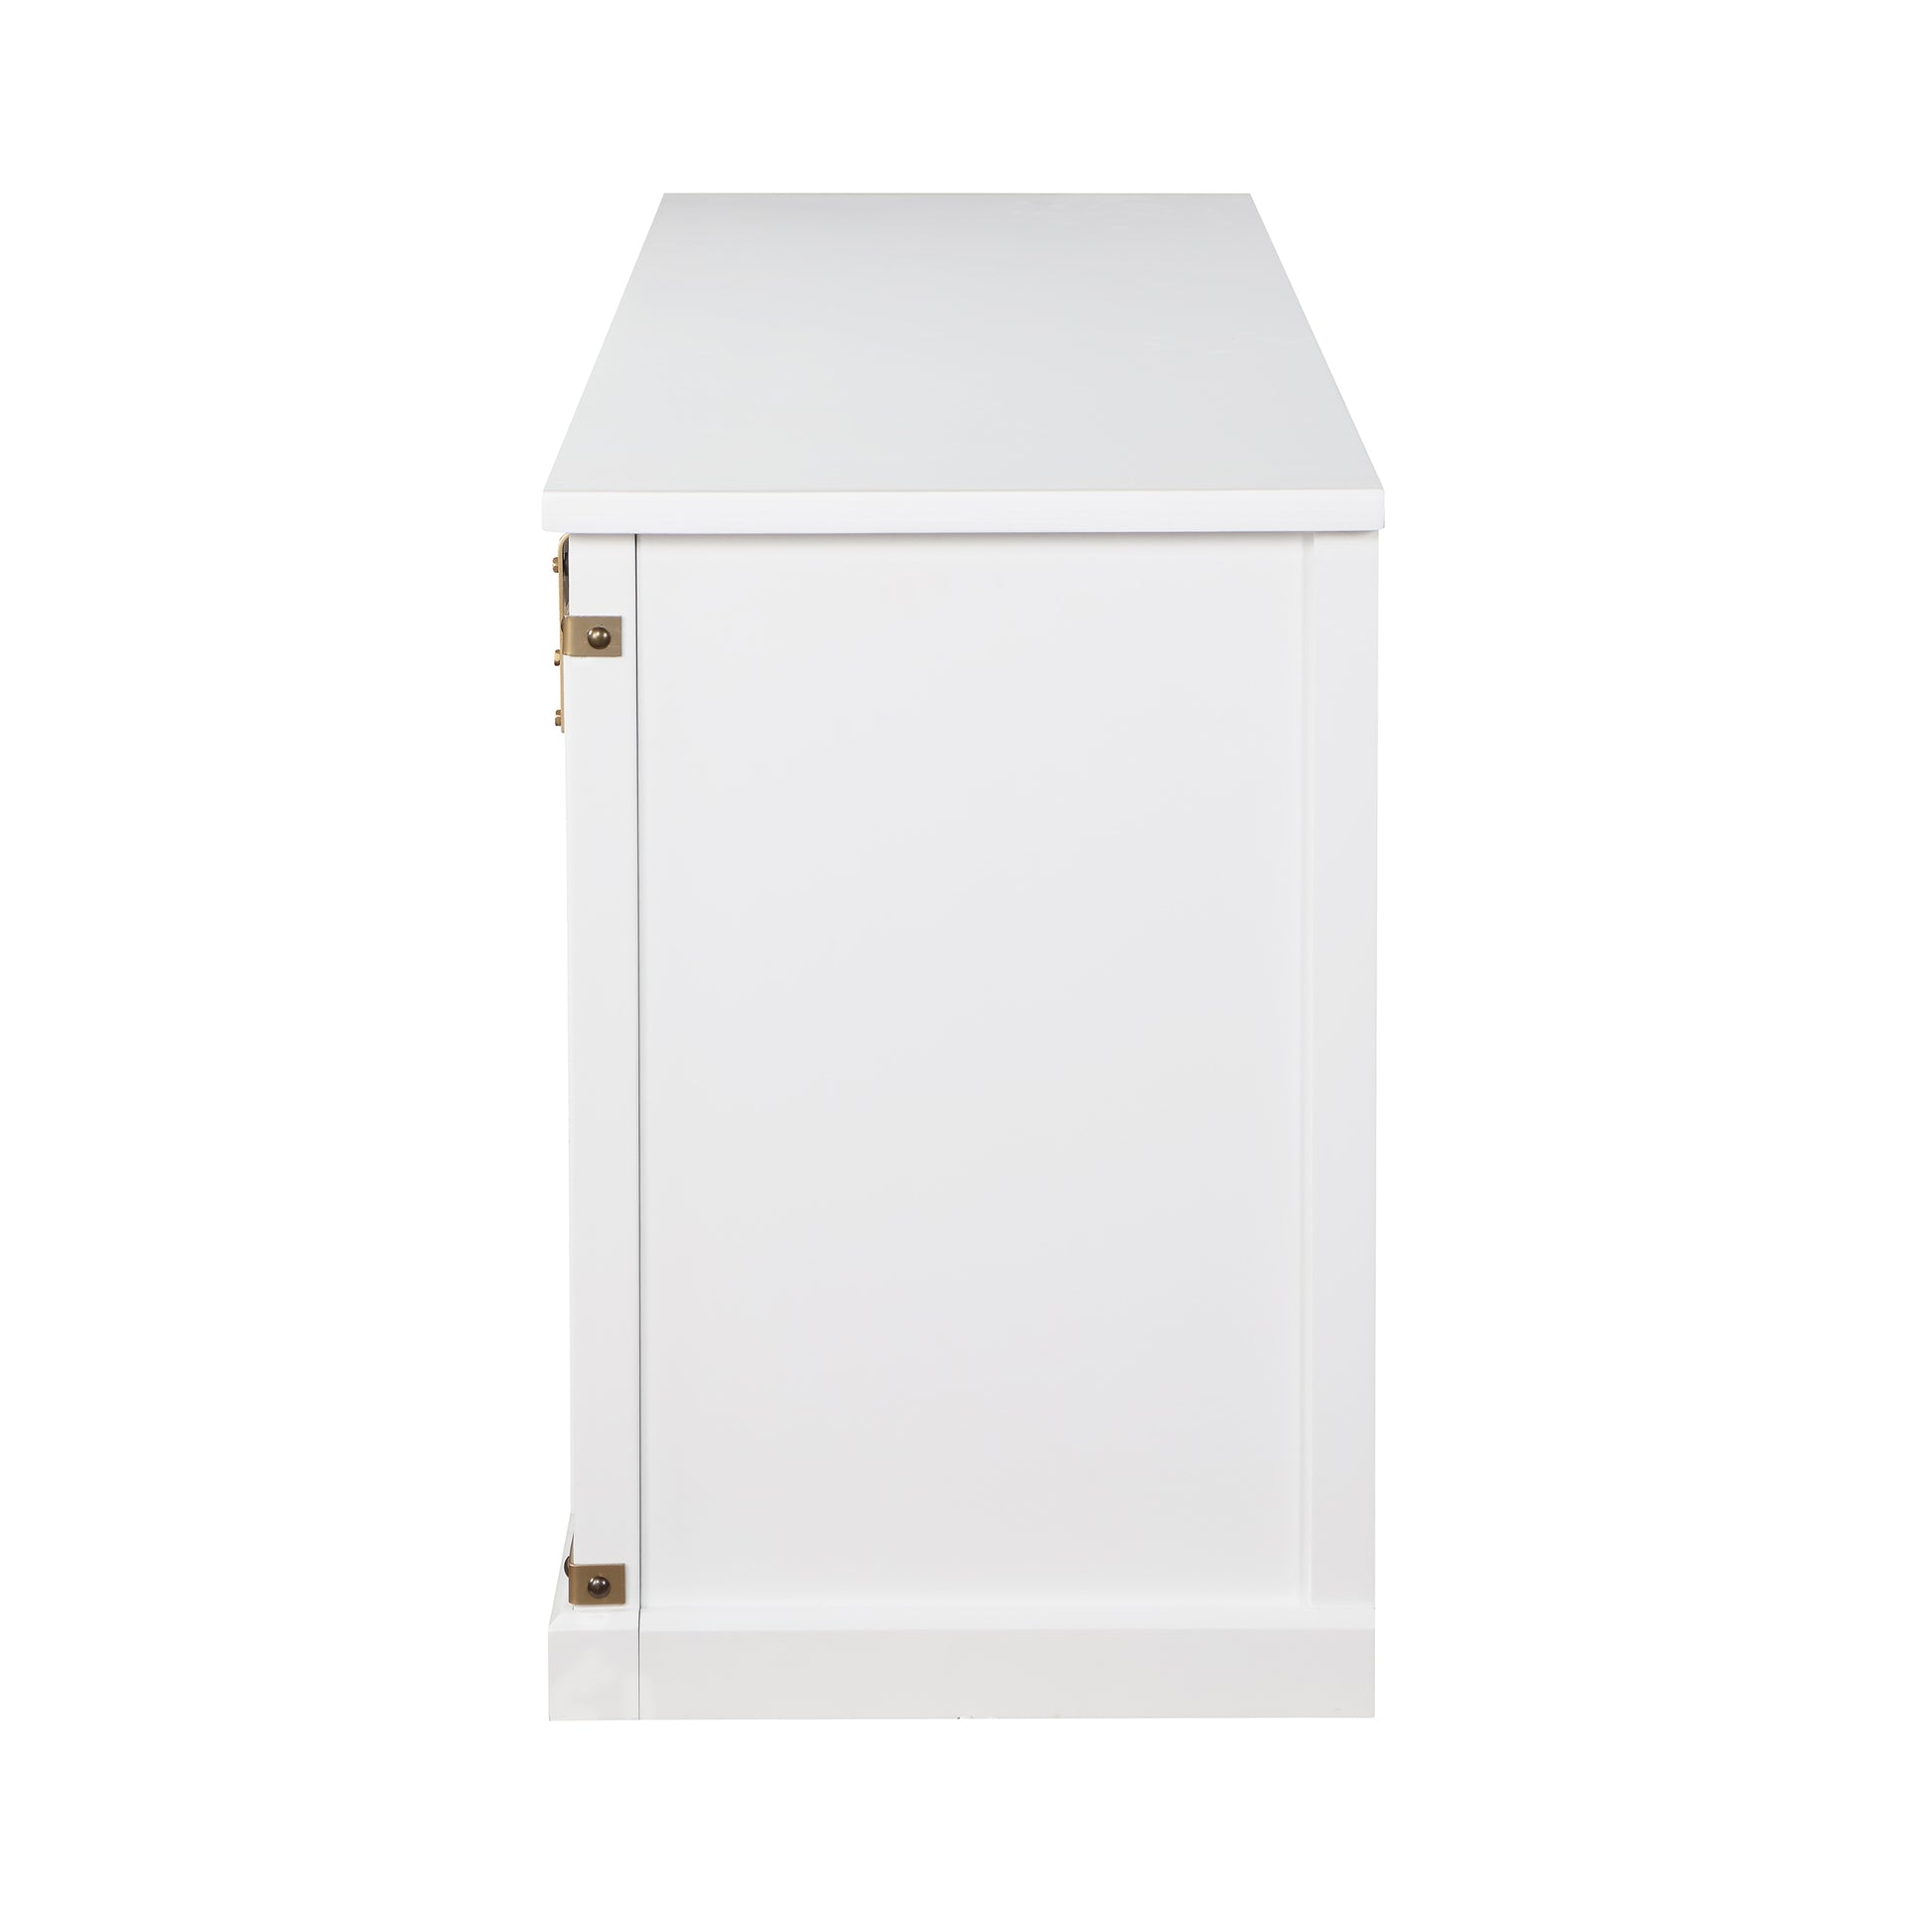 Front-facing side view of a farmhouse white and gold sliding door TV stand on a white background